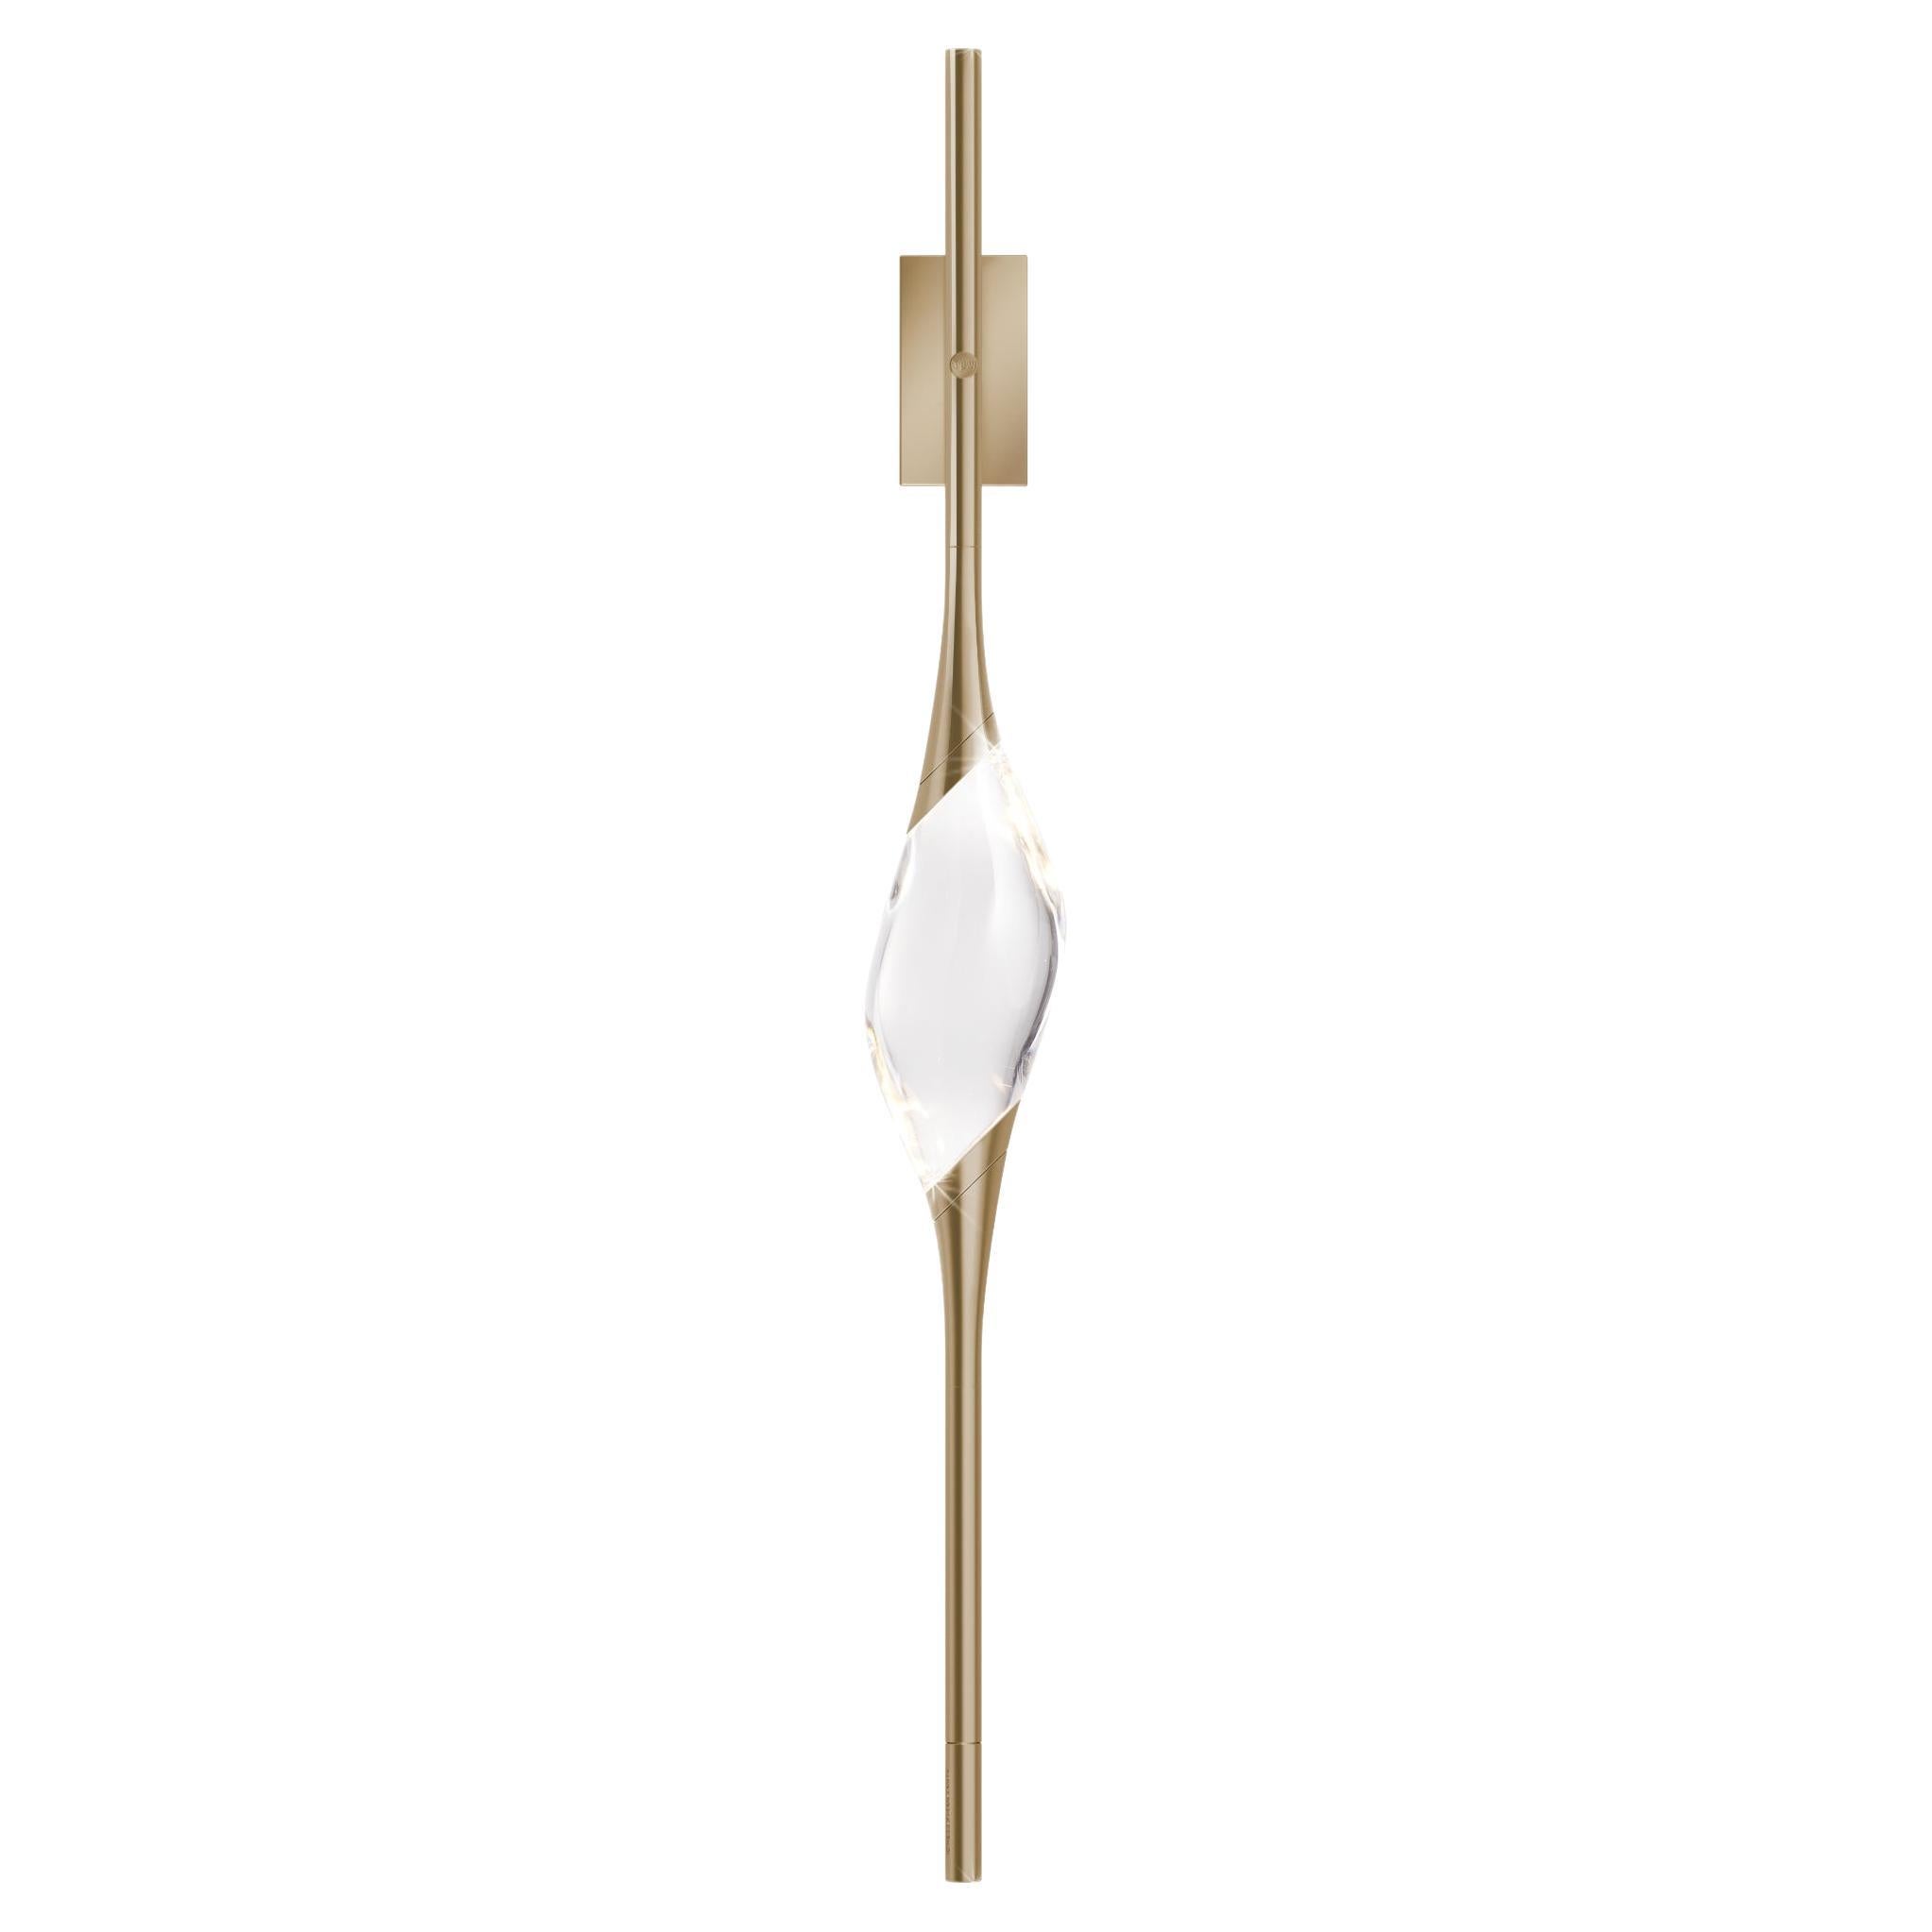 "Il Pezzo 12 Wall Sconce" - satin brass - crystal - LEDs - Made in Italy en vente